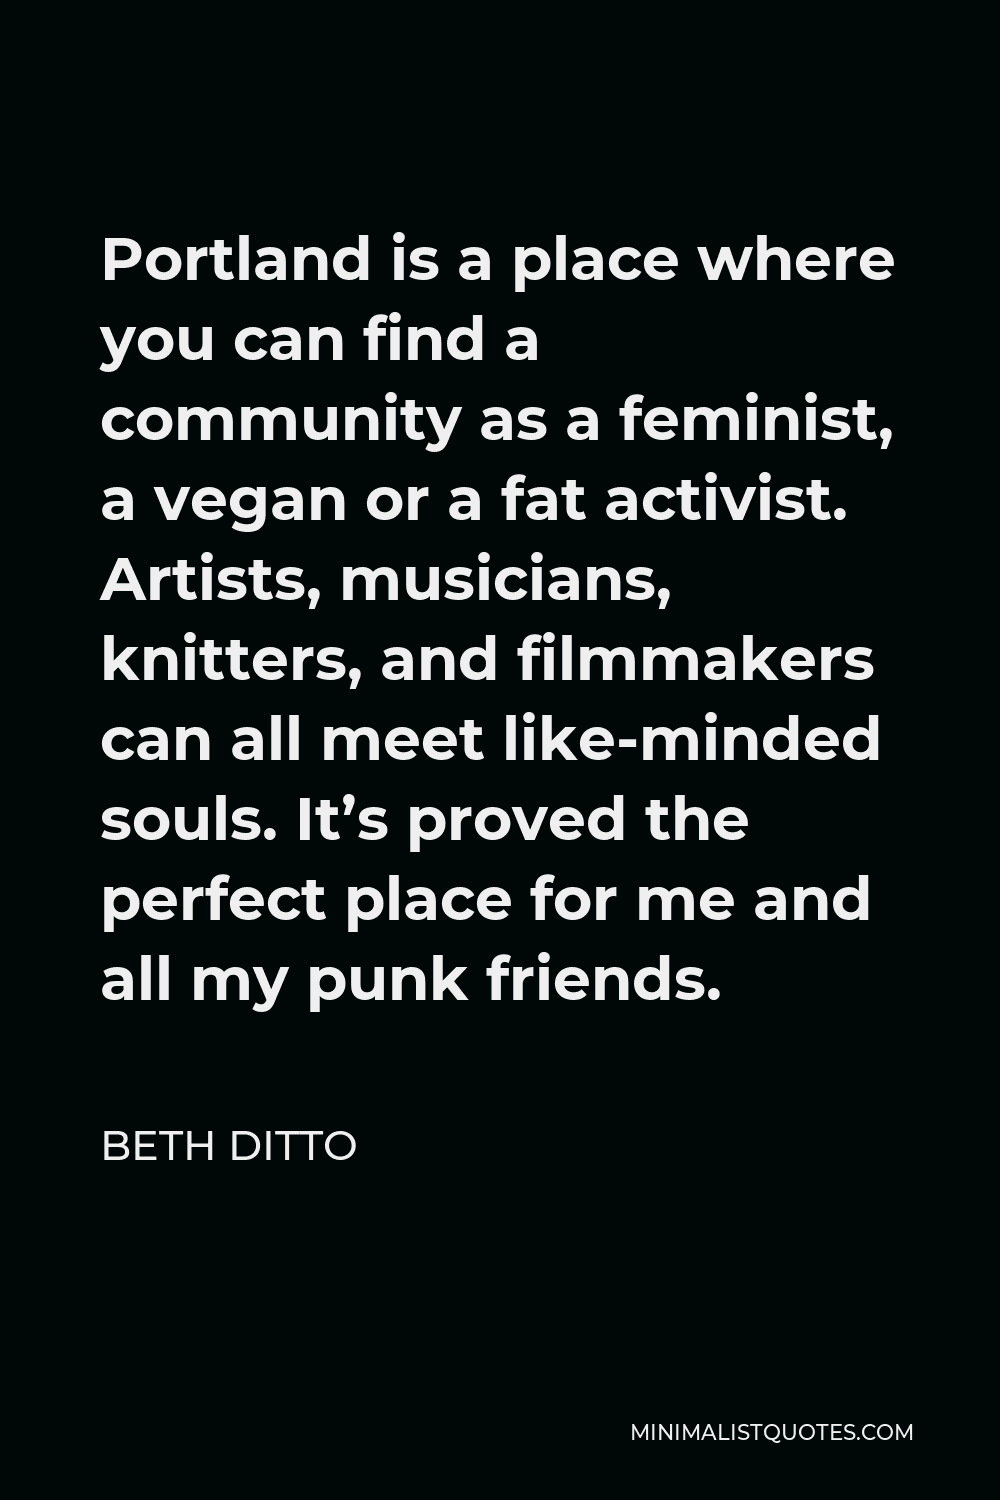 Beth Ditto Quote - Portland is a place where you can find a community as a feminist, a vegan or a fat activist. Artists, musicians, knitters, and filmmakers can all meet like-minded souls. It’s proved the perfect place for me and all my punk friends.